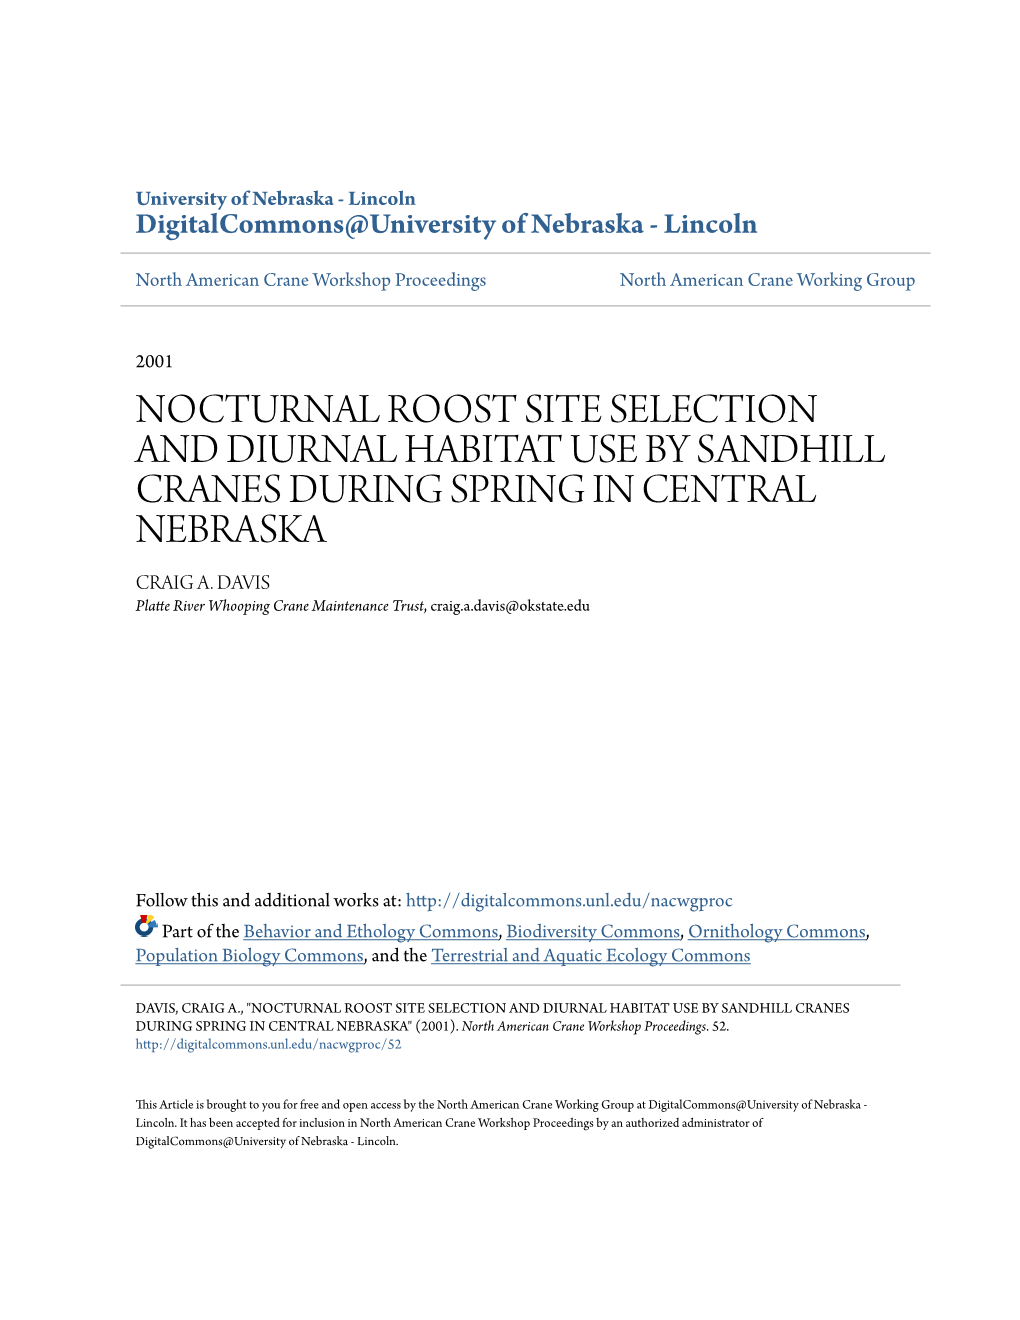 Nocturnal Roost Site Selection and Diurnal Habitat Use by Sandhill Cranes During Spring in Central Nebraska Craig A